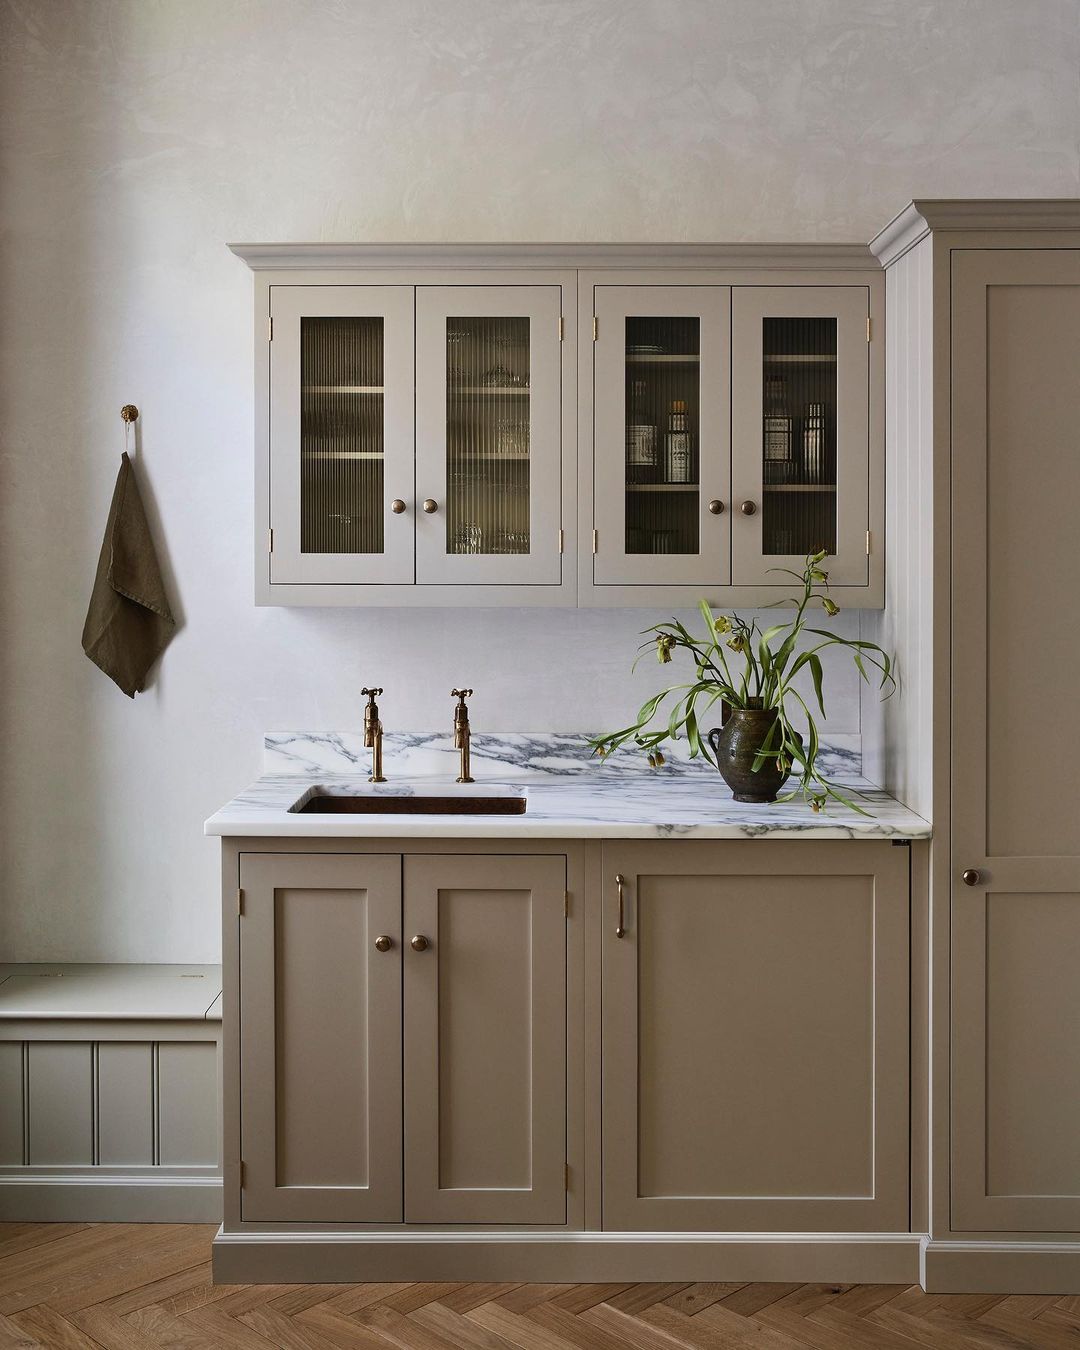 Revamp Your Kitchen with Benjamin Moore Smokey Taupe Cabinets - See the ...